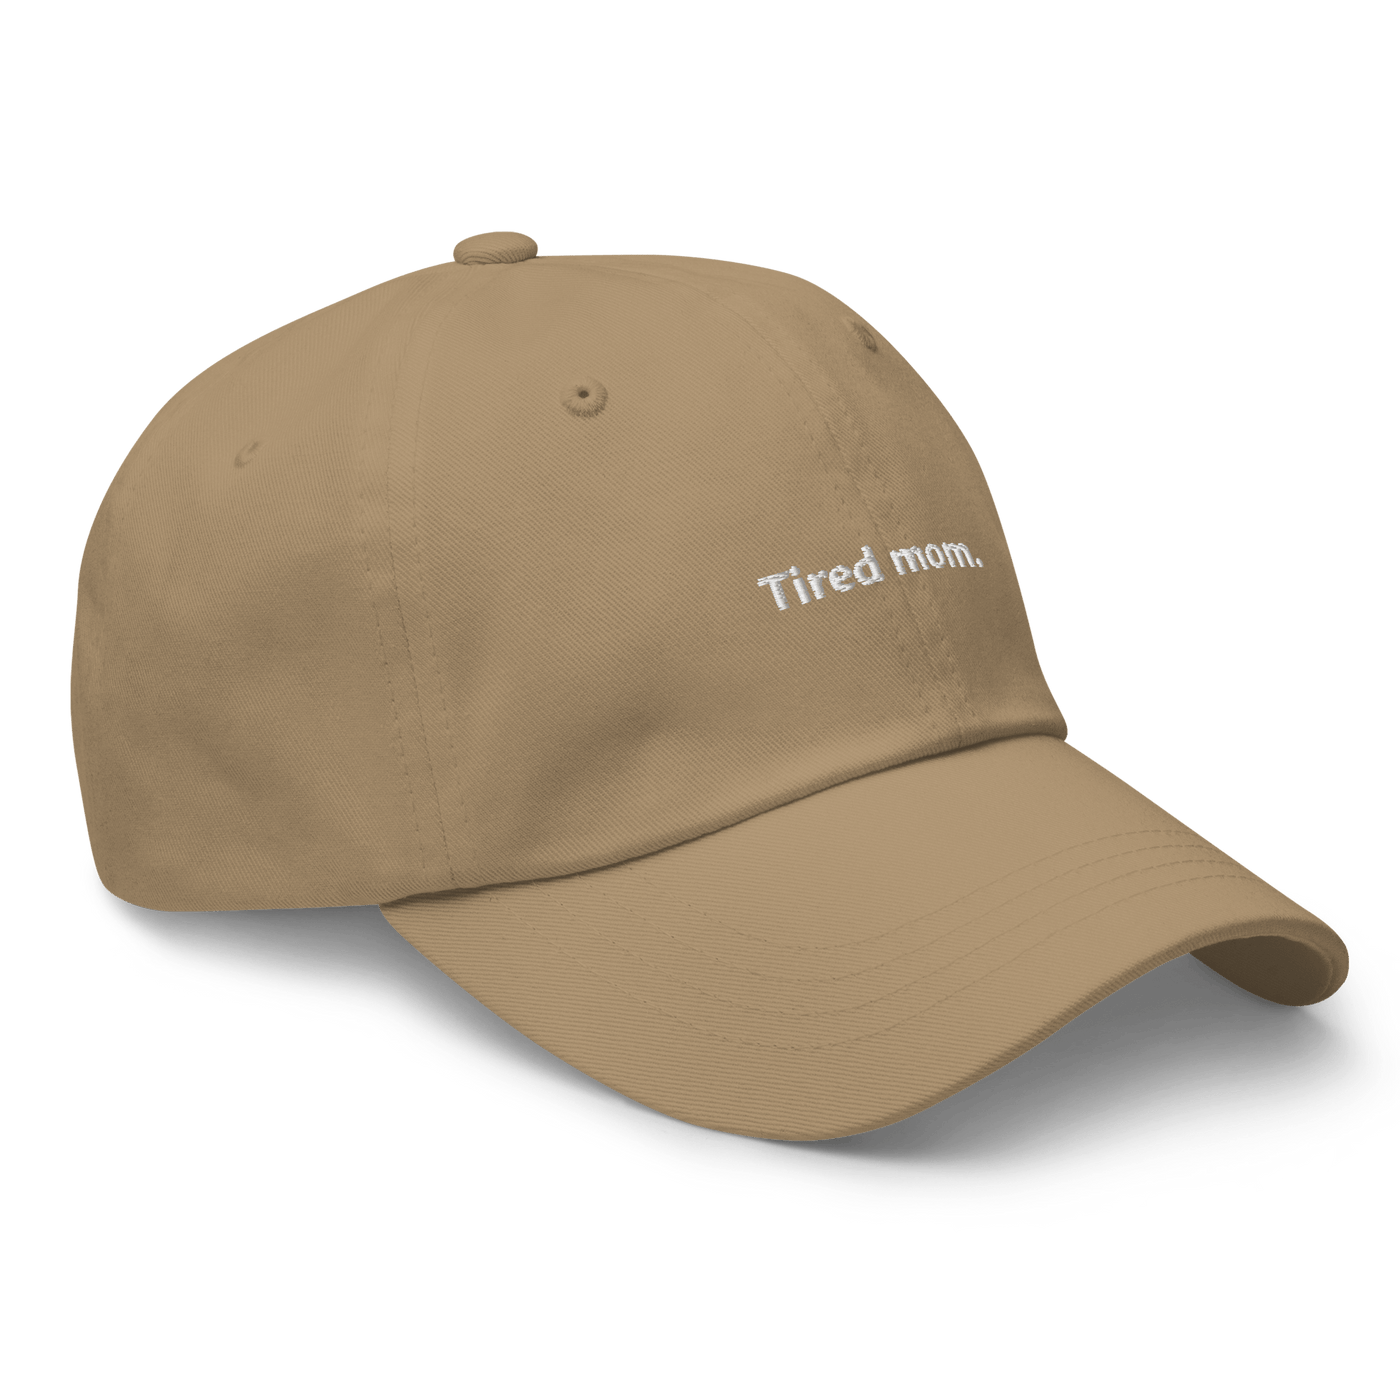 Tired mom Dad hat - Khaki - - Just Another Cap Store